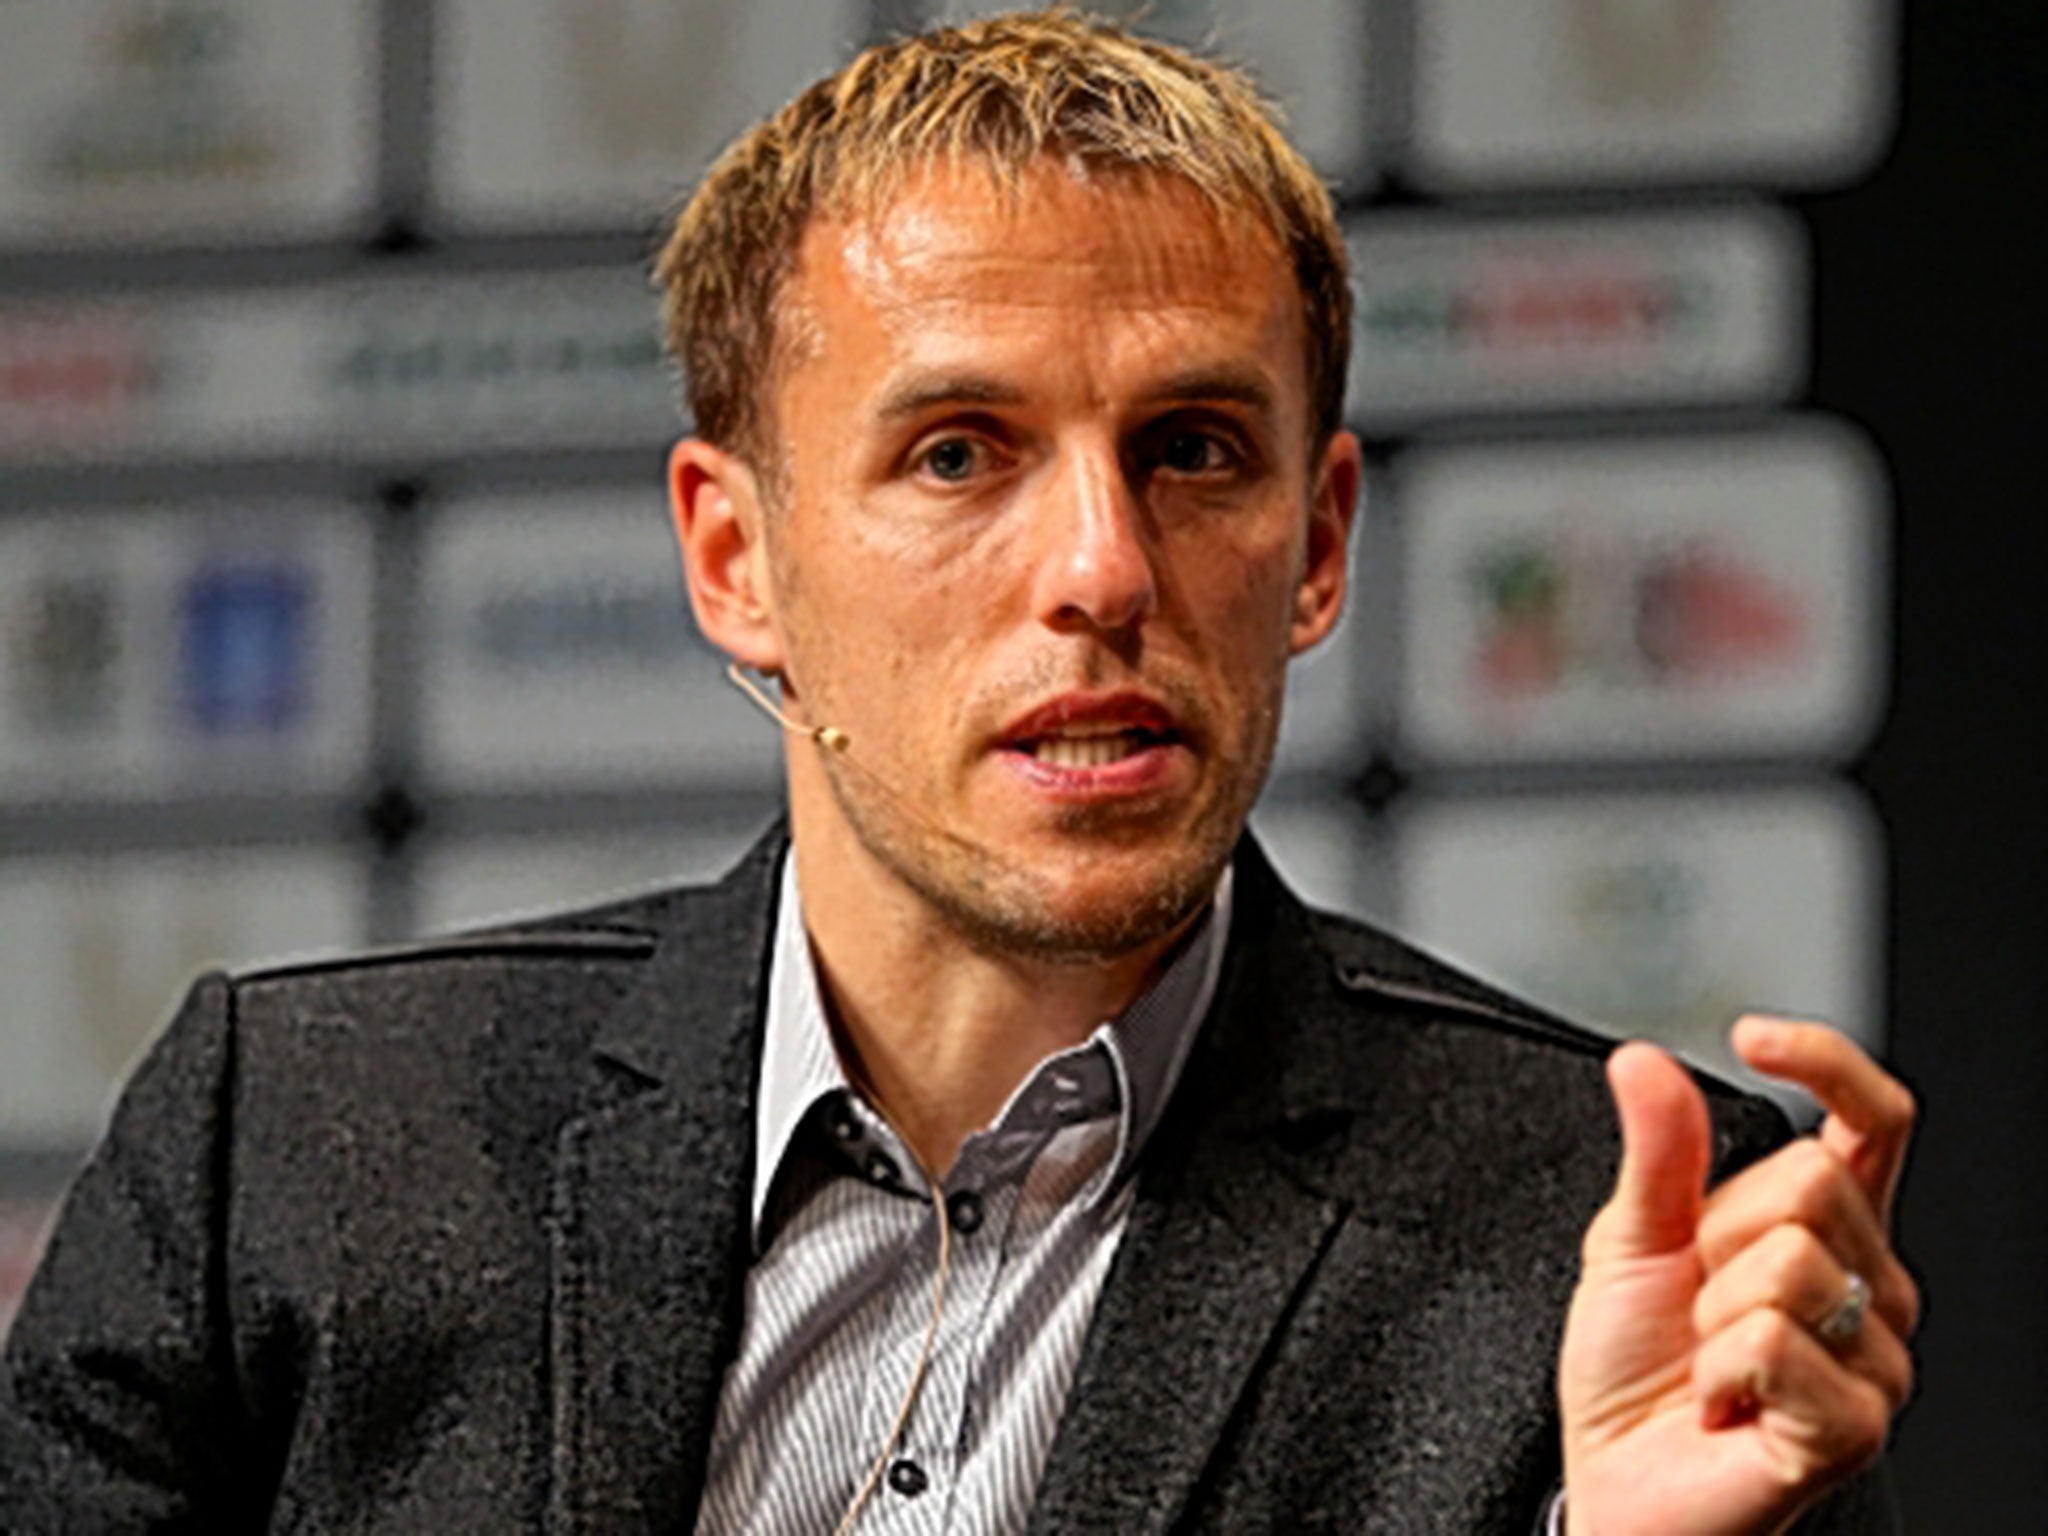 Former Manchester United footballer Phil Neville caused a stir with his Tomas Rosicky comments